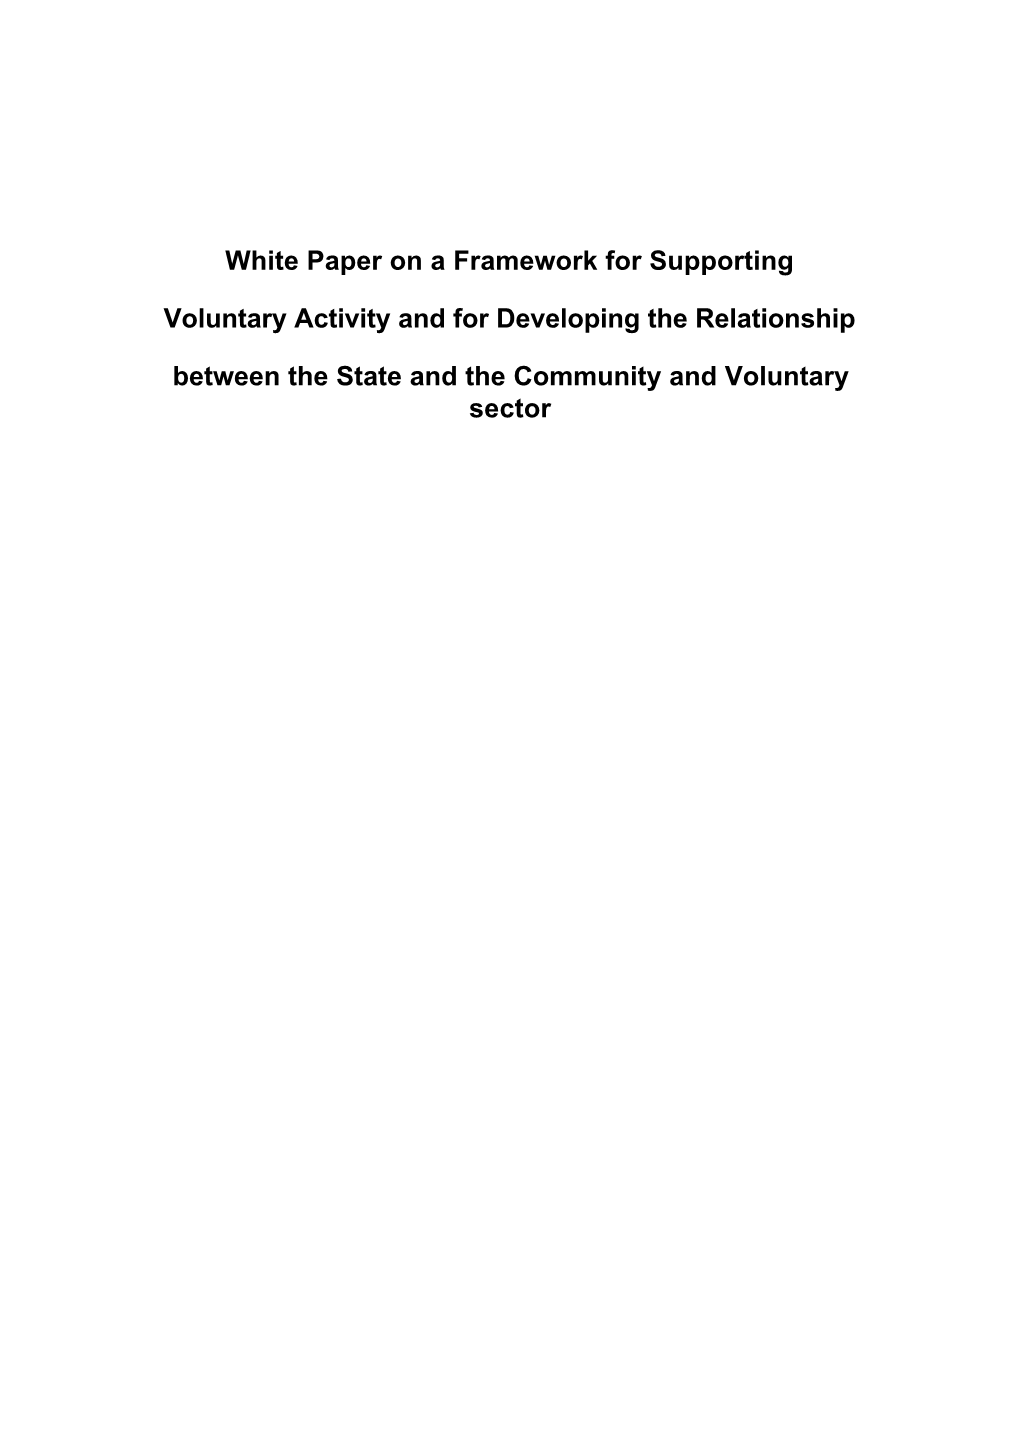 White Paper: Framework for Supporting Voluntary Activity